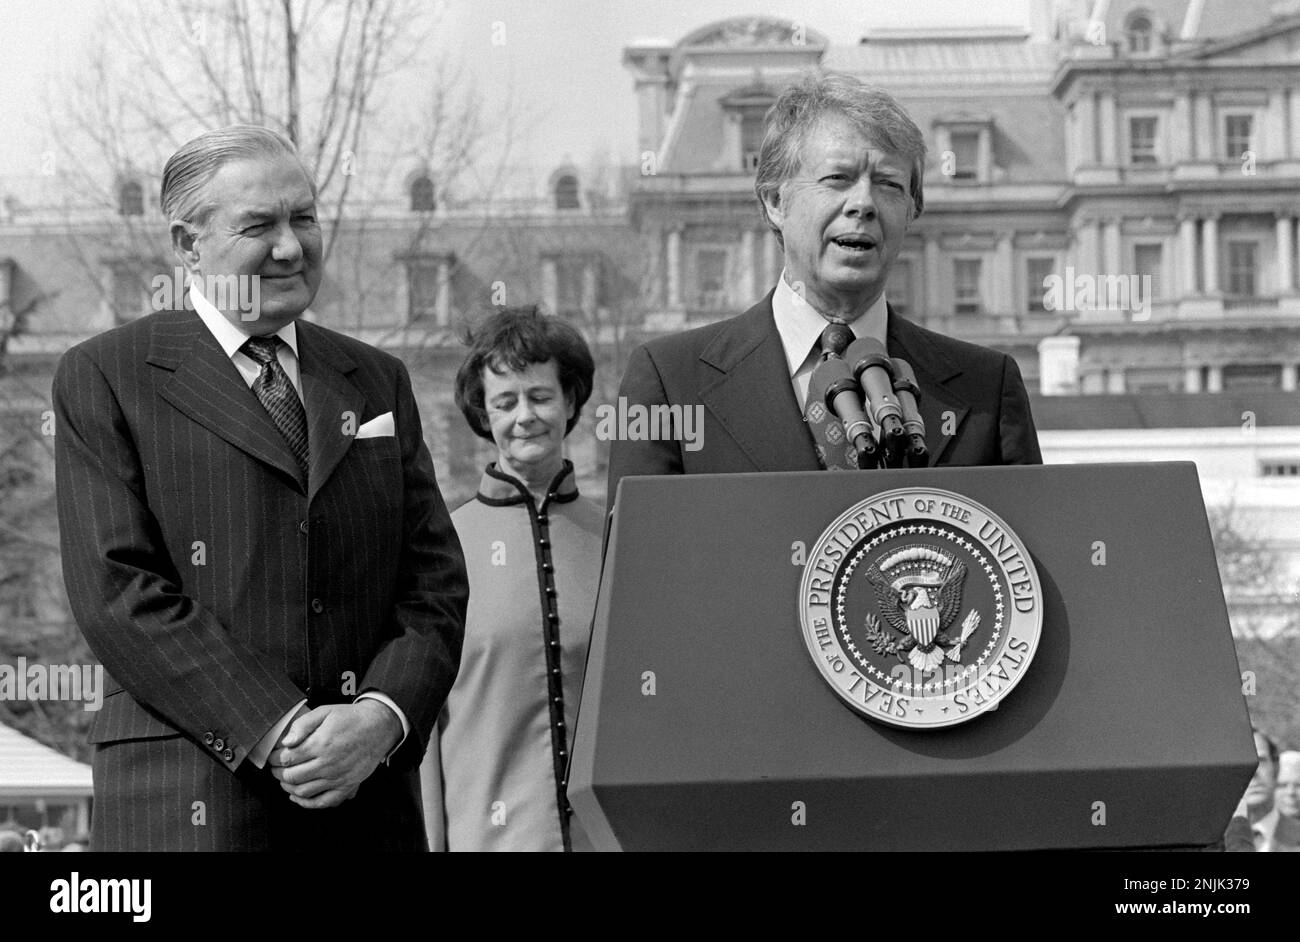 United States President Jimmy Carter, right, makes remarks as he welcomes Prime Minister James Callaghan of the United Kingdom of Great Briitain and Northern Ireland, left, during an Official Arrival ceremony on the South Lawn of the White House in Washington, DC on March 10, 1977. Mrs. James (Audrey) Callaghan, center, observes.Credit: Benjamin E. 'Gene' Forte/CNP/Sipa USA Credit: Sipa USA/Alamy Live News Stock Photo